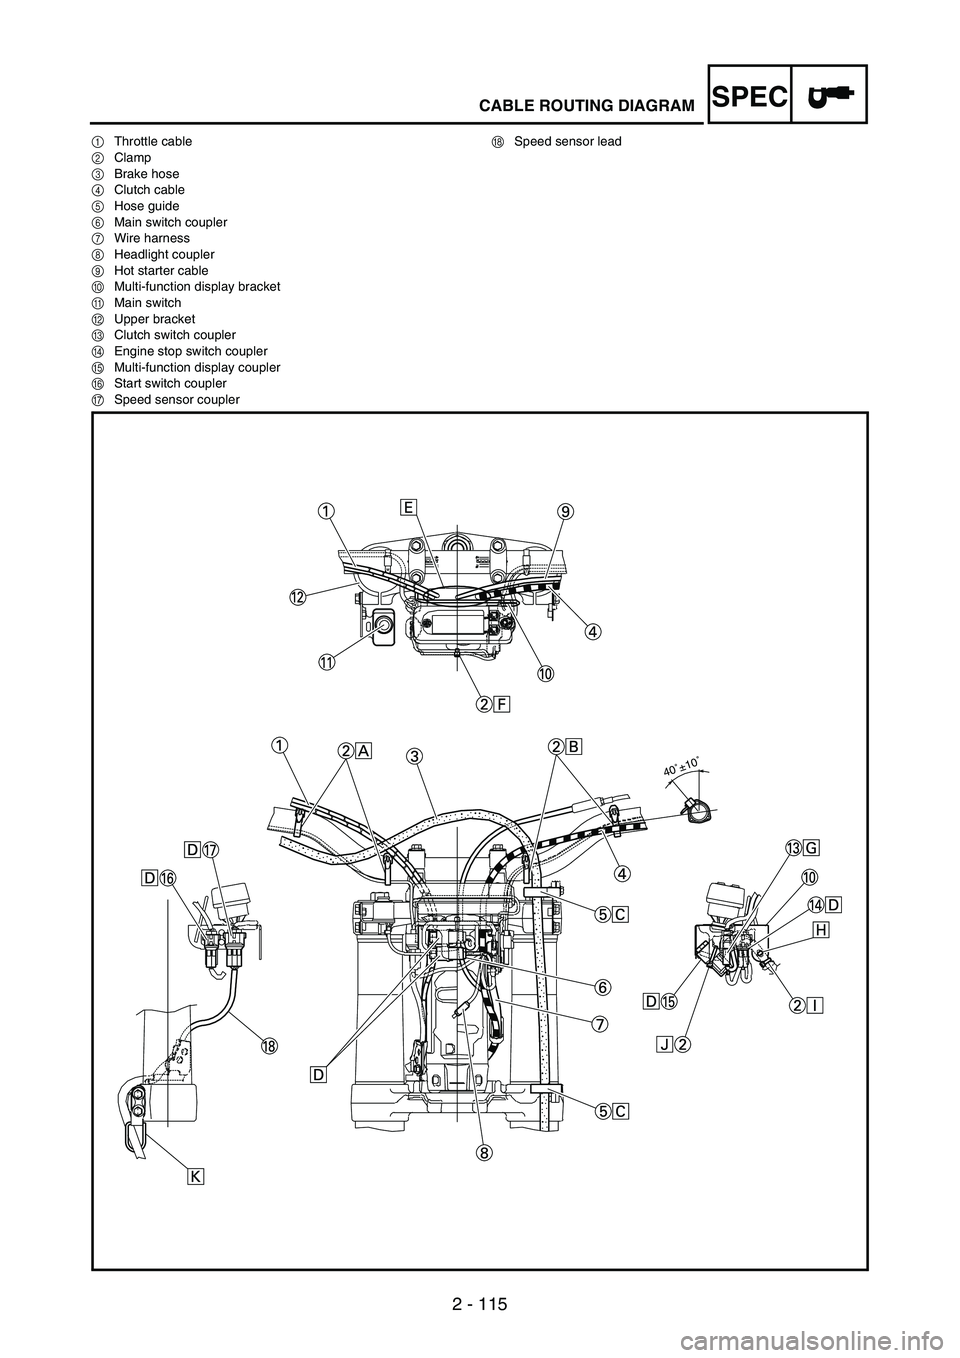 YAMAHA WR 250F 2007  Manuale duso (in Italian) 2 - 115
SPECCABLE ROUTING DIAGRAM
1Throttle cable
2Clamp
3Brake hose
4Clutch cable
5Hose guide
6Main switch coupler
7Wire harness
8Headlight coupler
9Hot starter cable
0Multi-function display bracket
